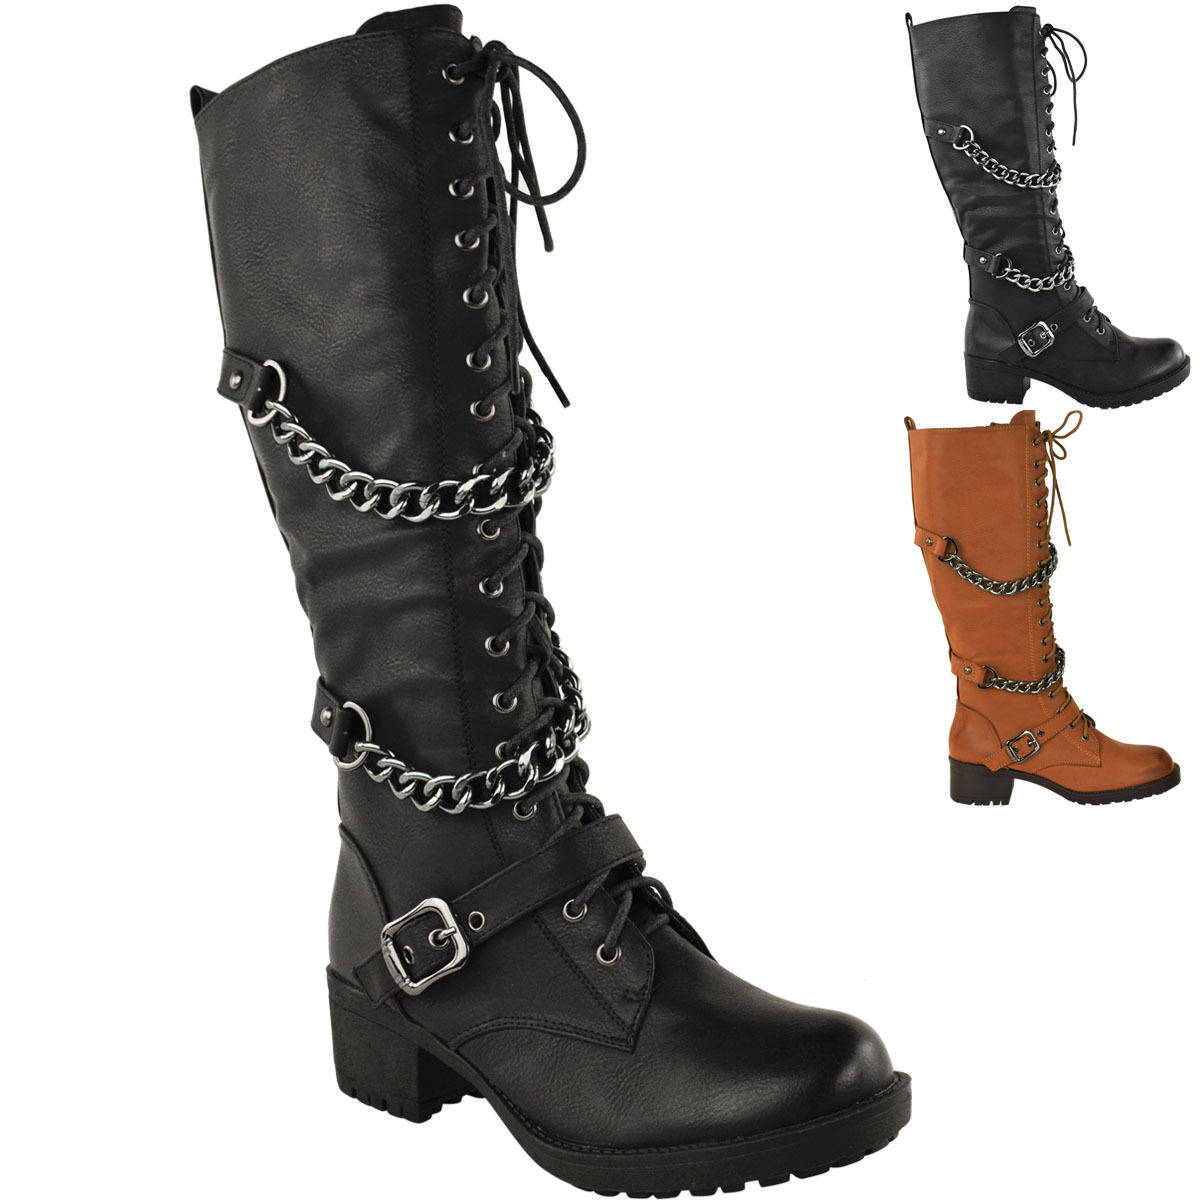 Ladies Womens Knee High Mid Calf Lace Up Biker Punk Military Combat Boots Shoes